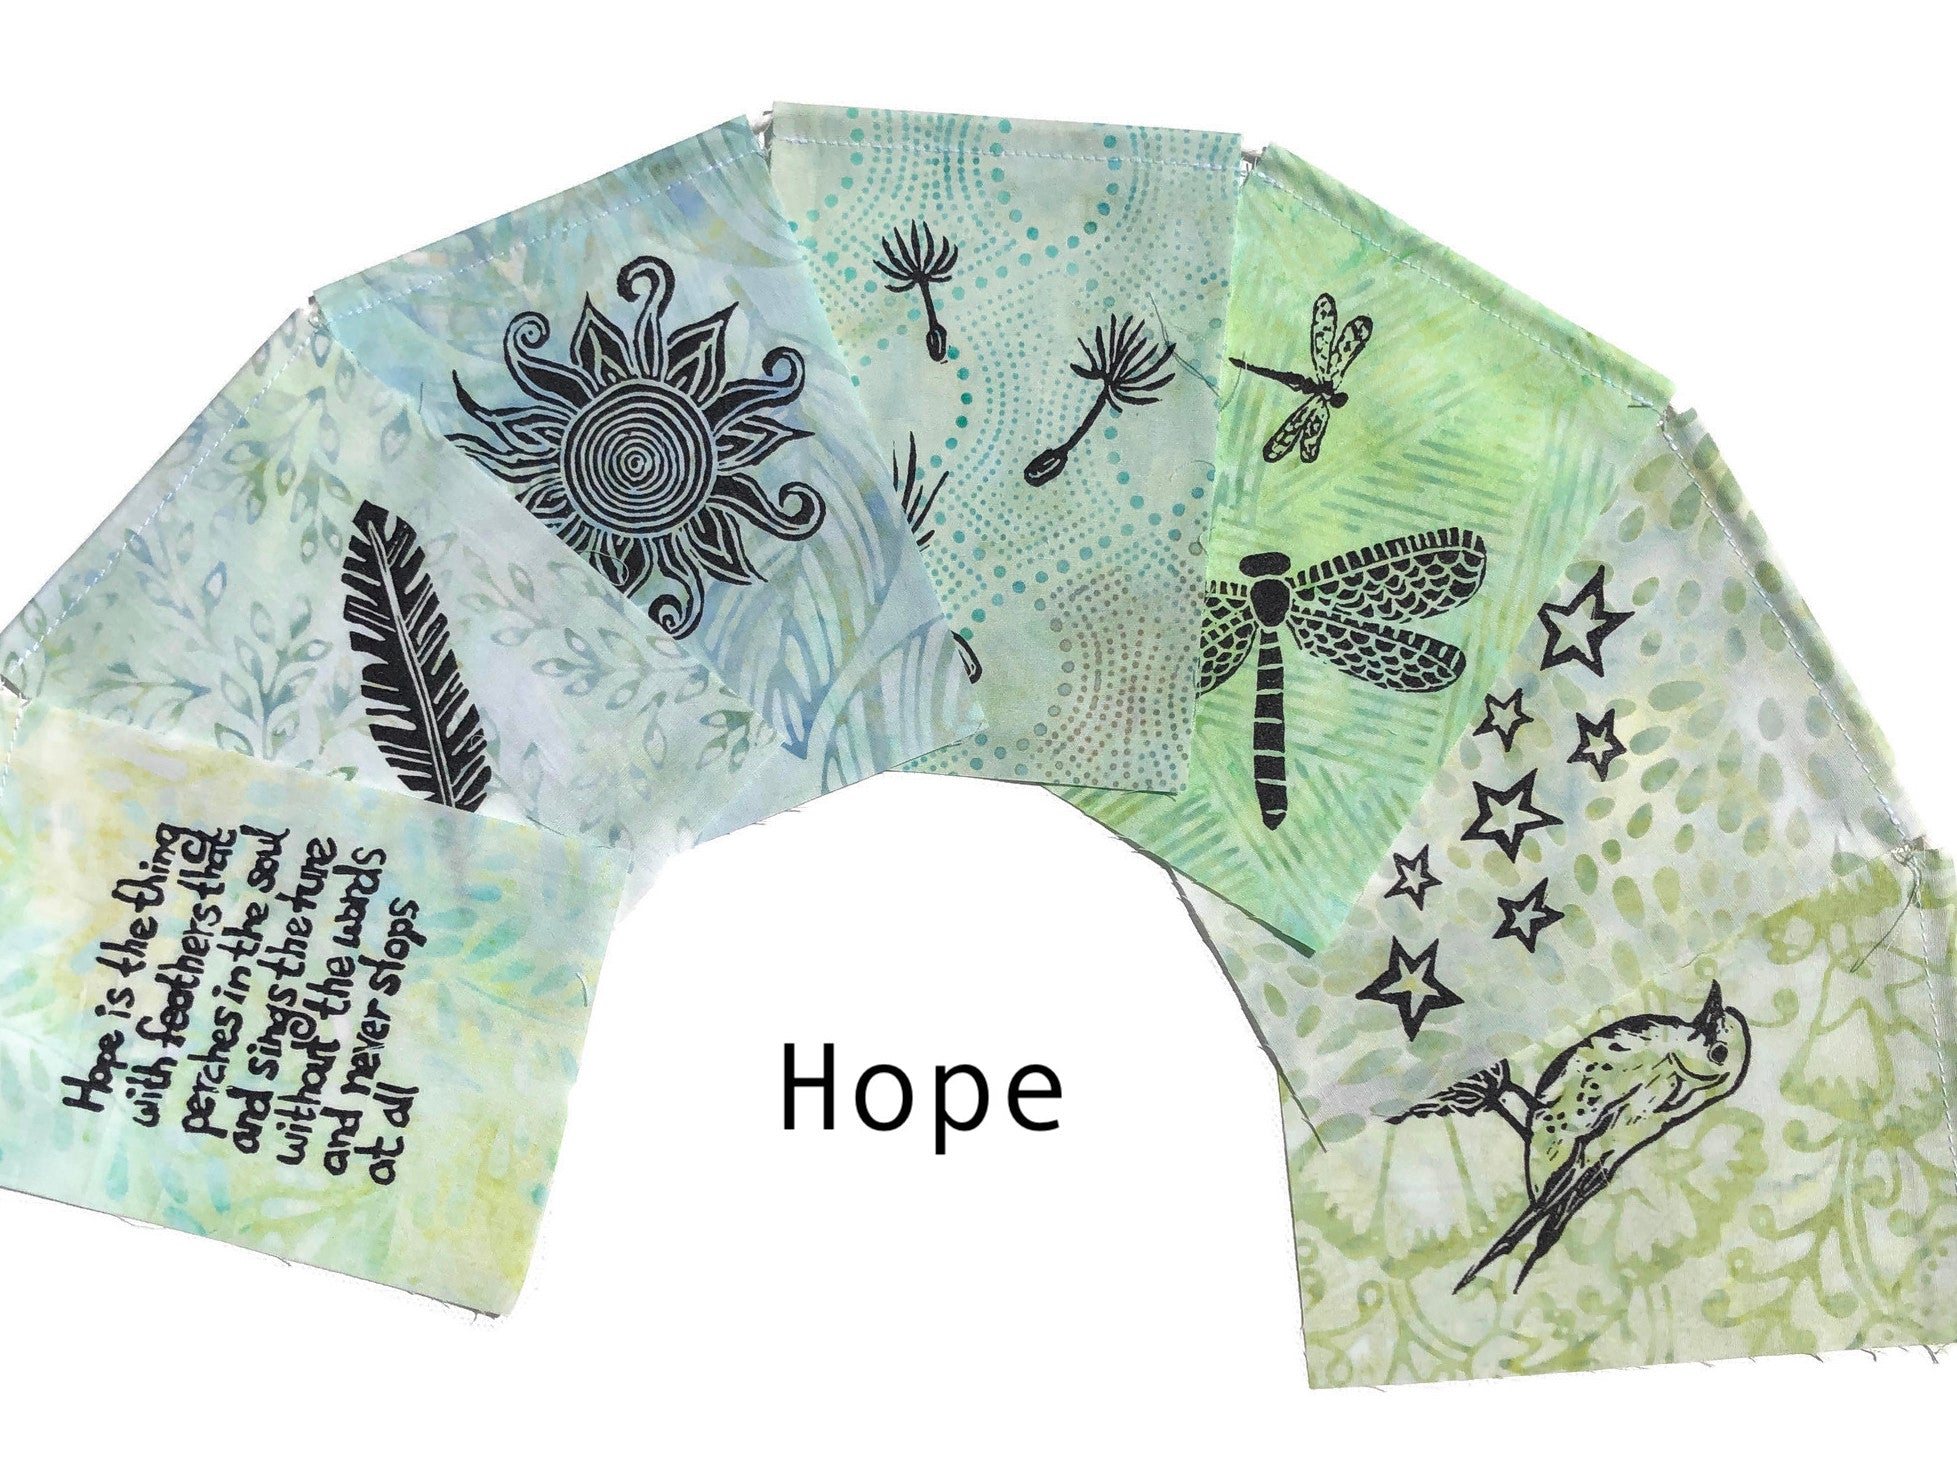 Small Flag Set with images and words about hope